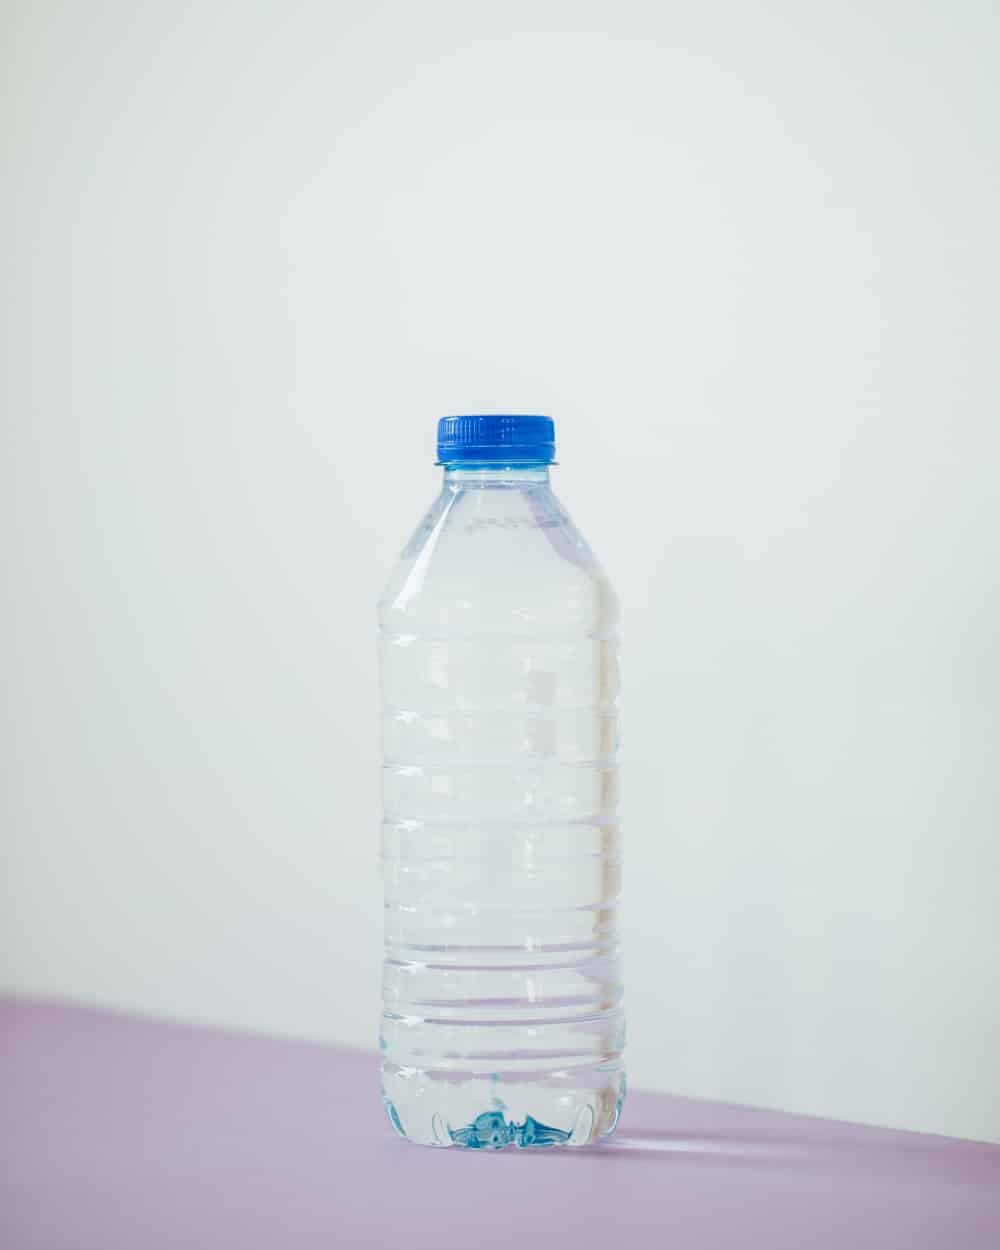 14 Super Easy Plastic Bottles Recycling Ideas at Home